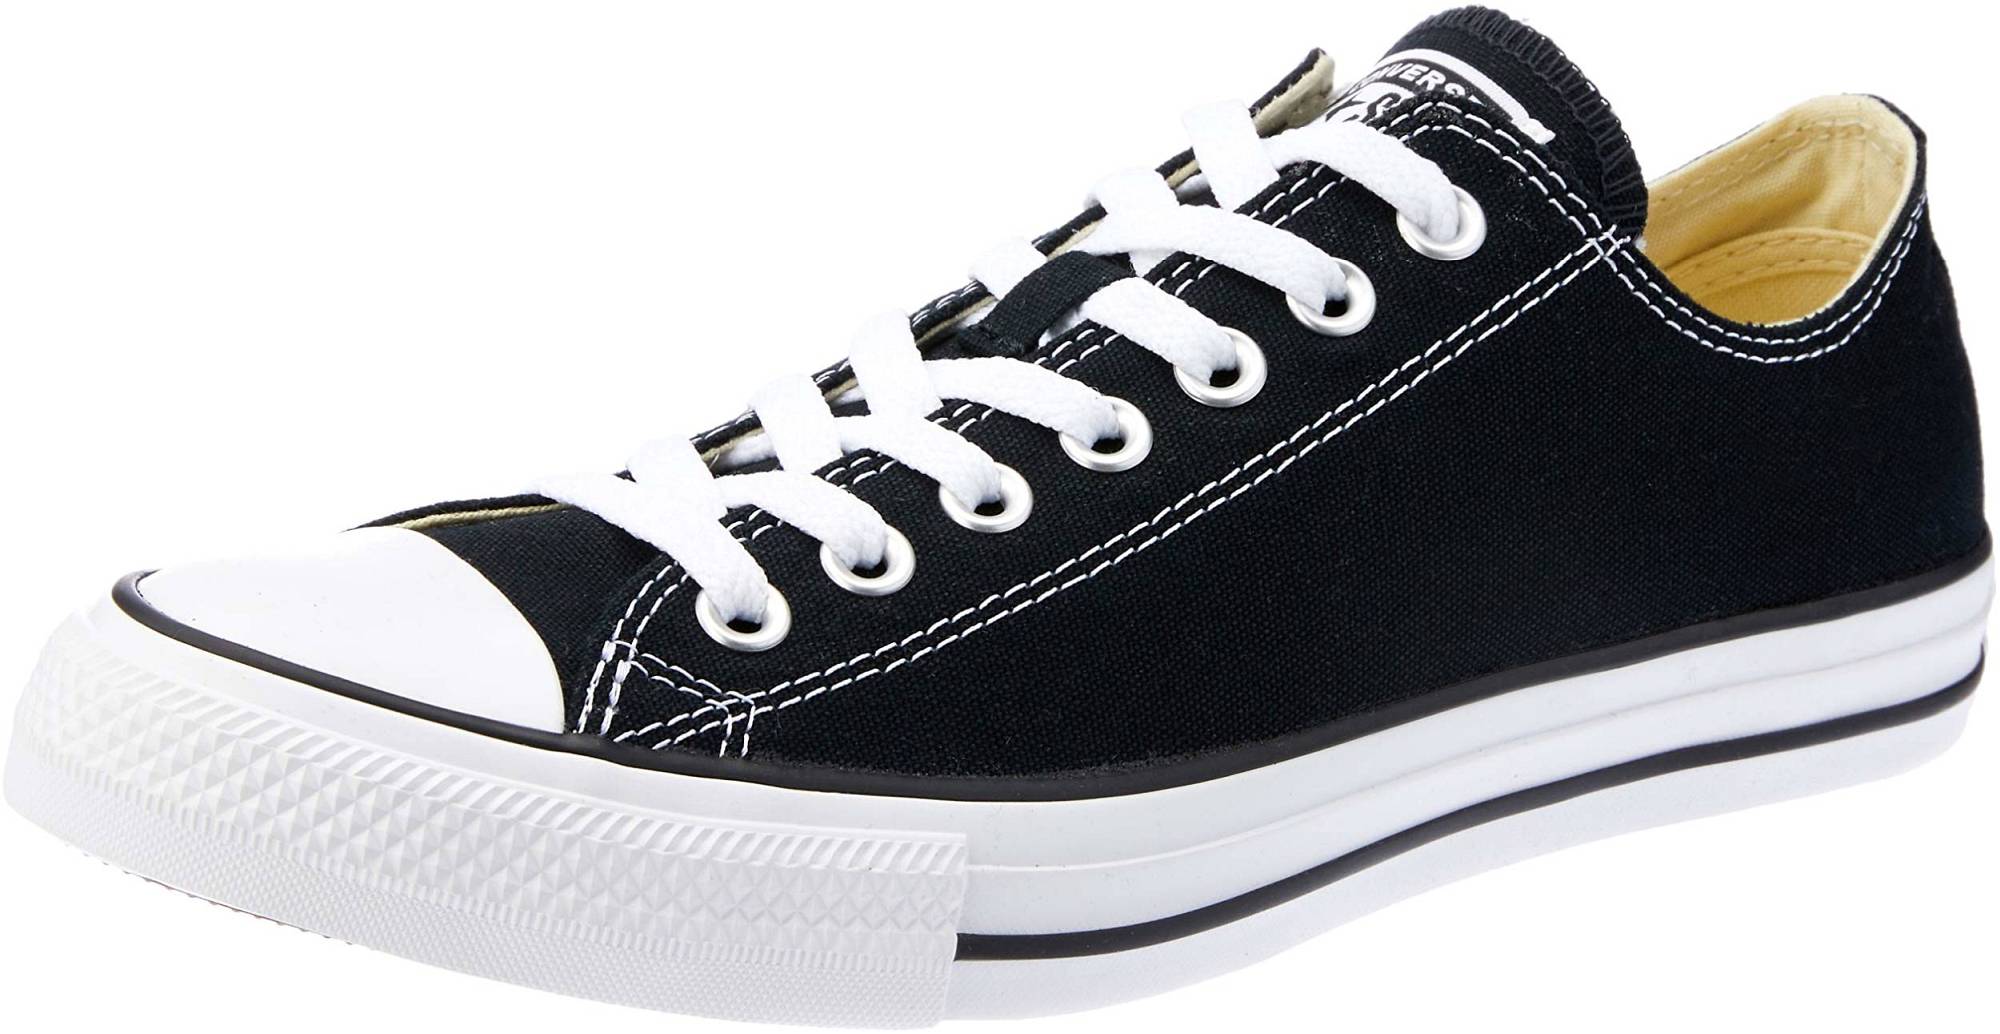 Chuck Taylor All Star Core Ox color